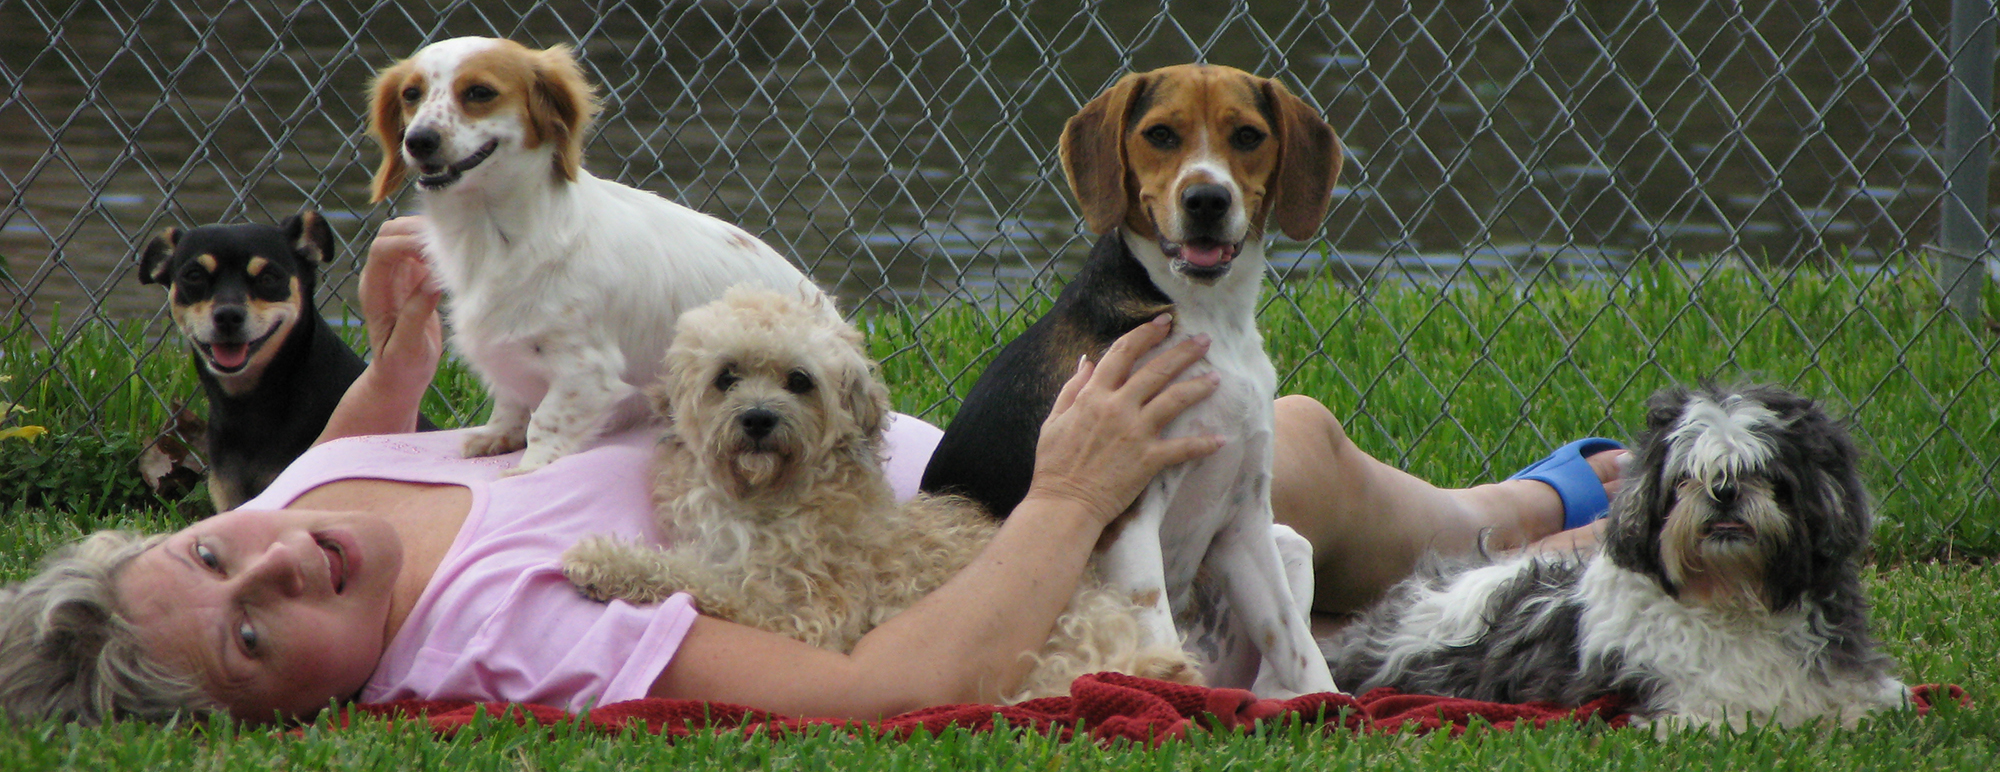 Five small dogs sitting around a woman lying in the grass.